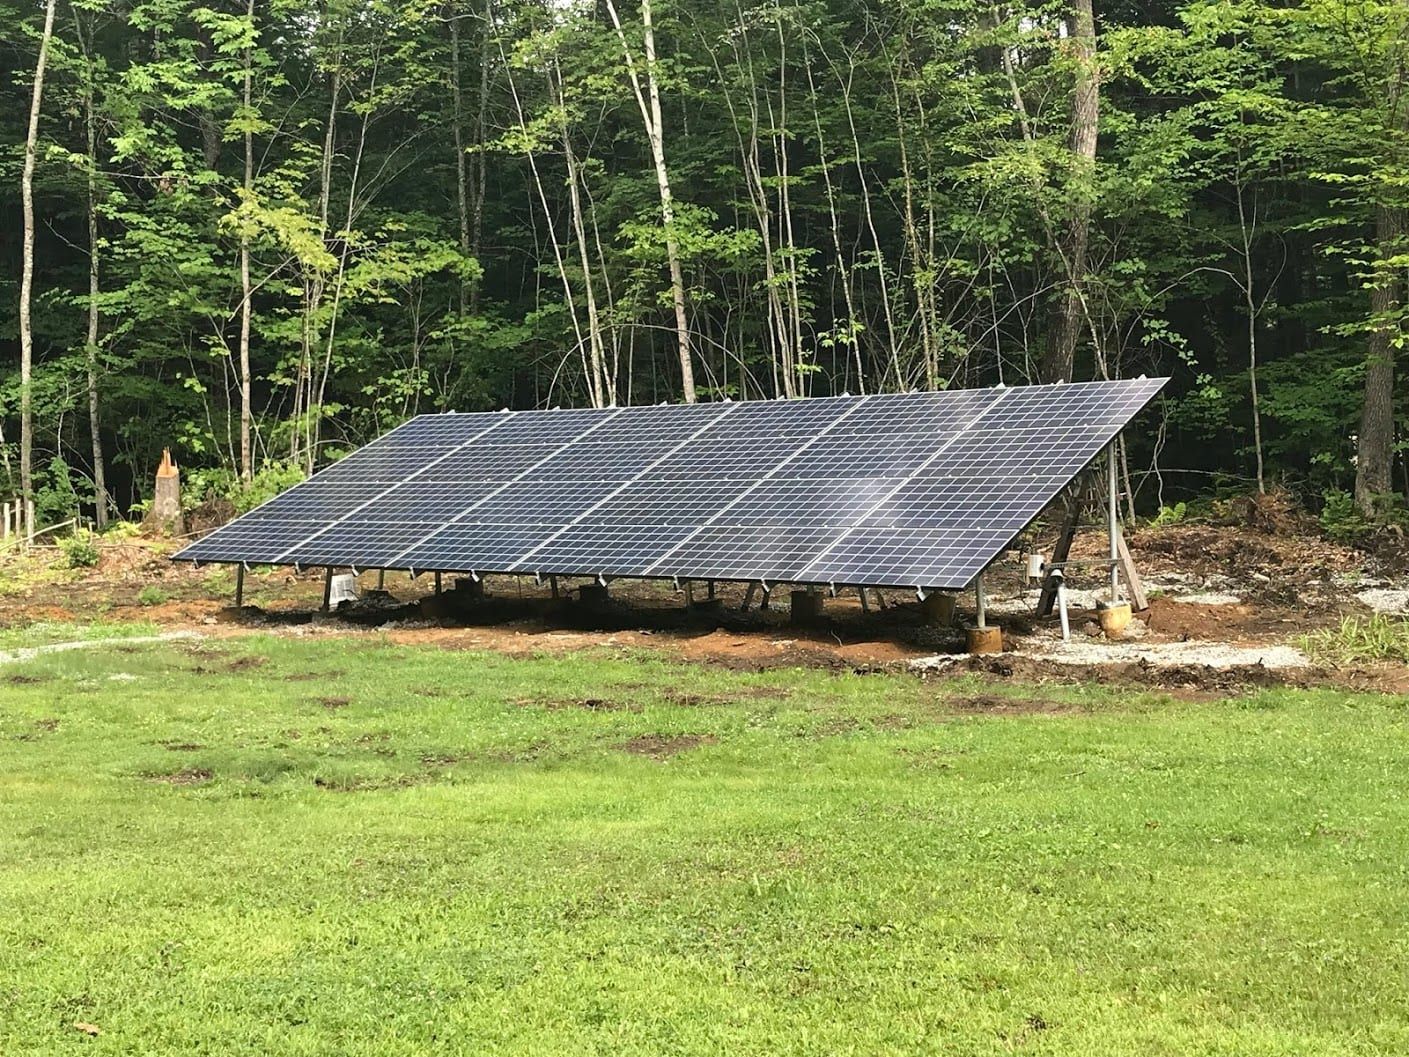 7 Tips for a Successful DIY Ground Mount Solar Project